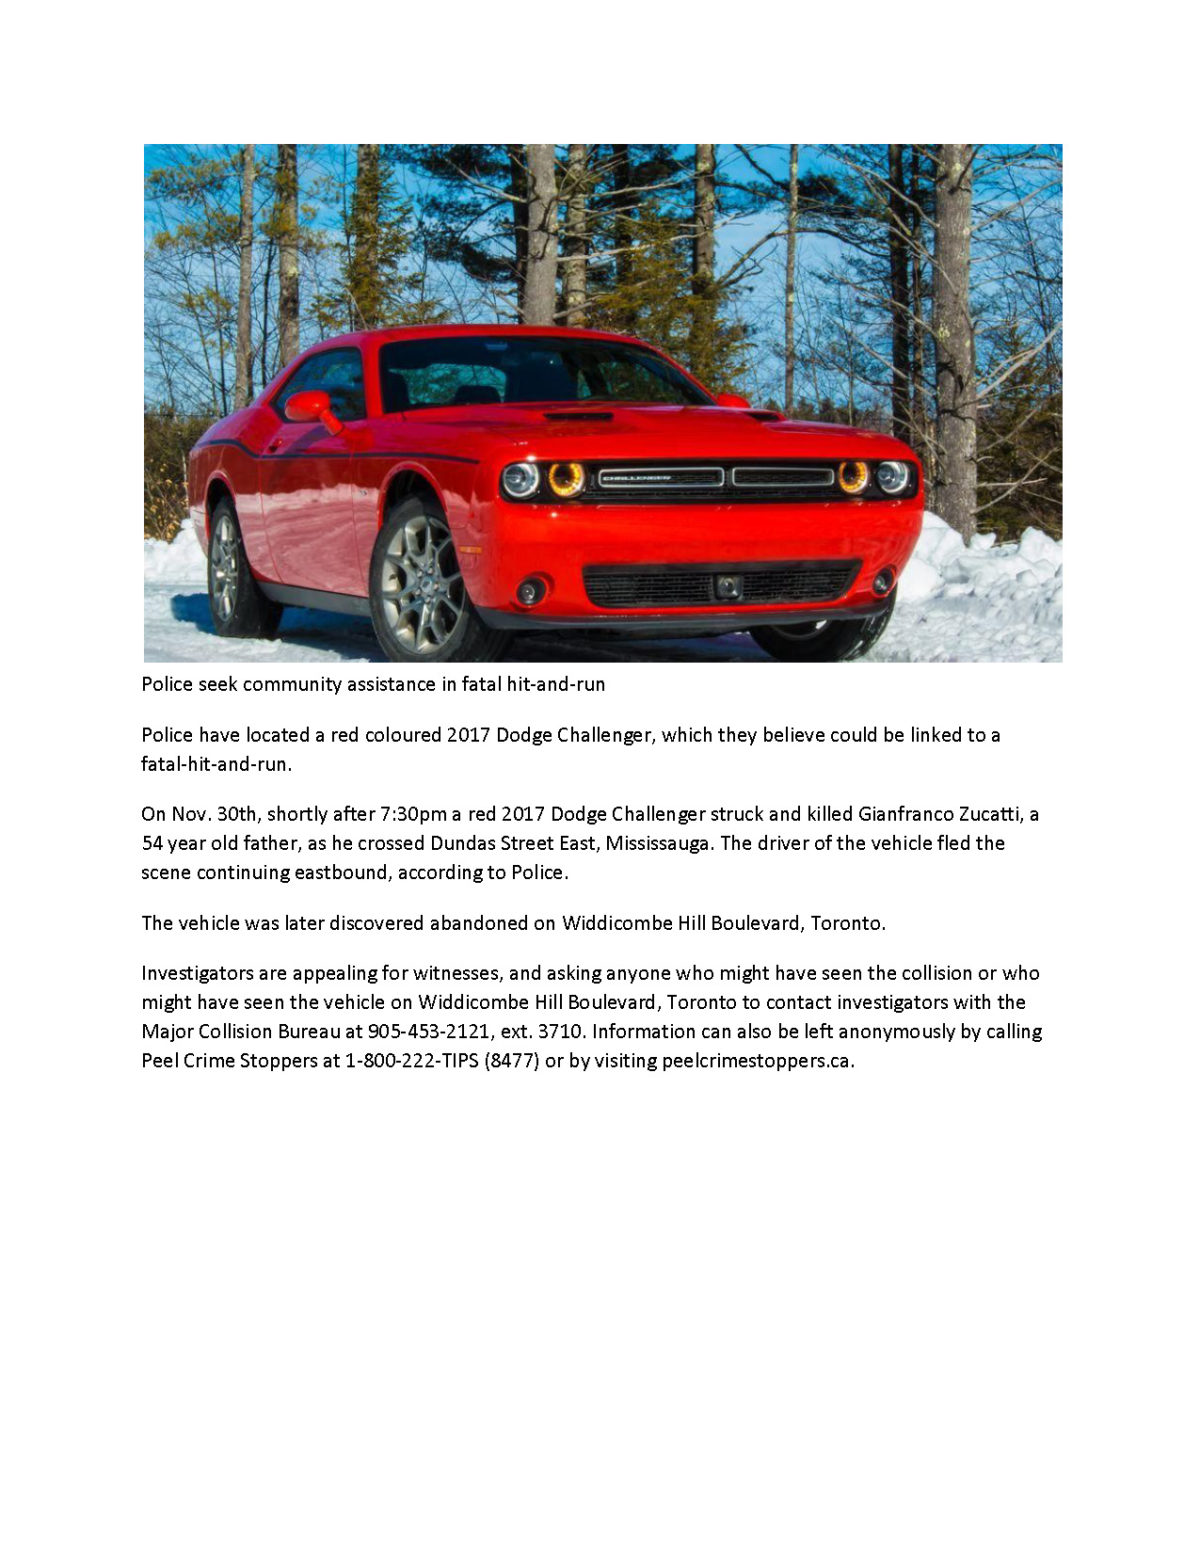 Police have located a 2017 red Dodge Charger.